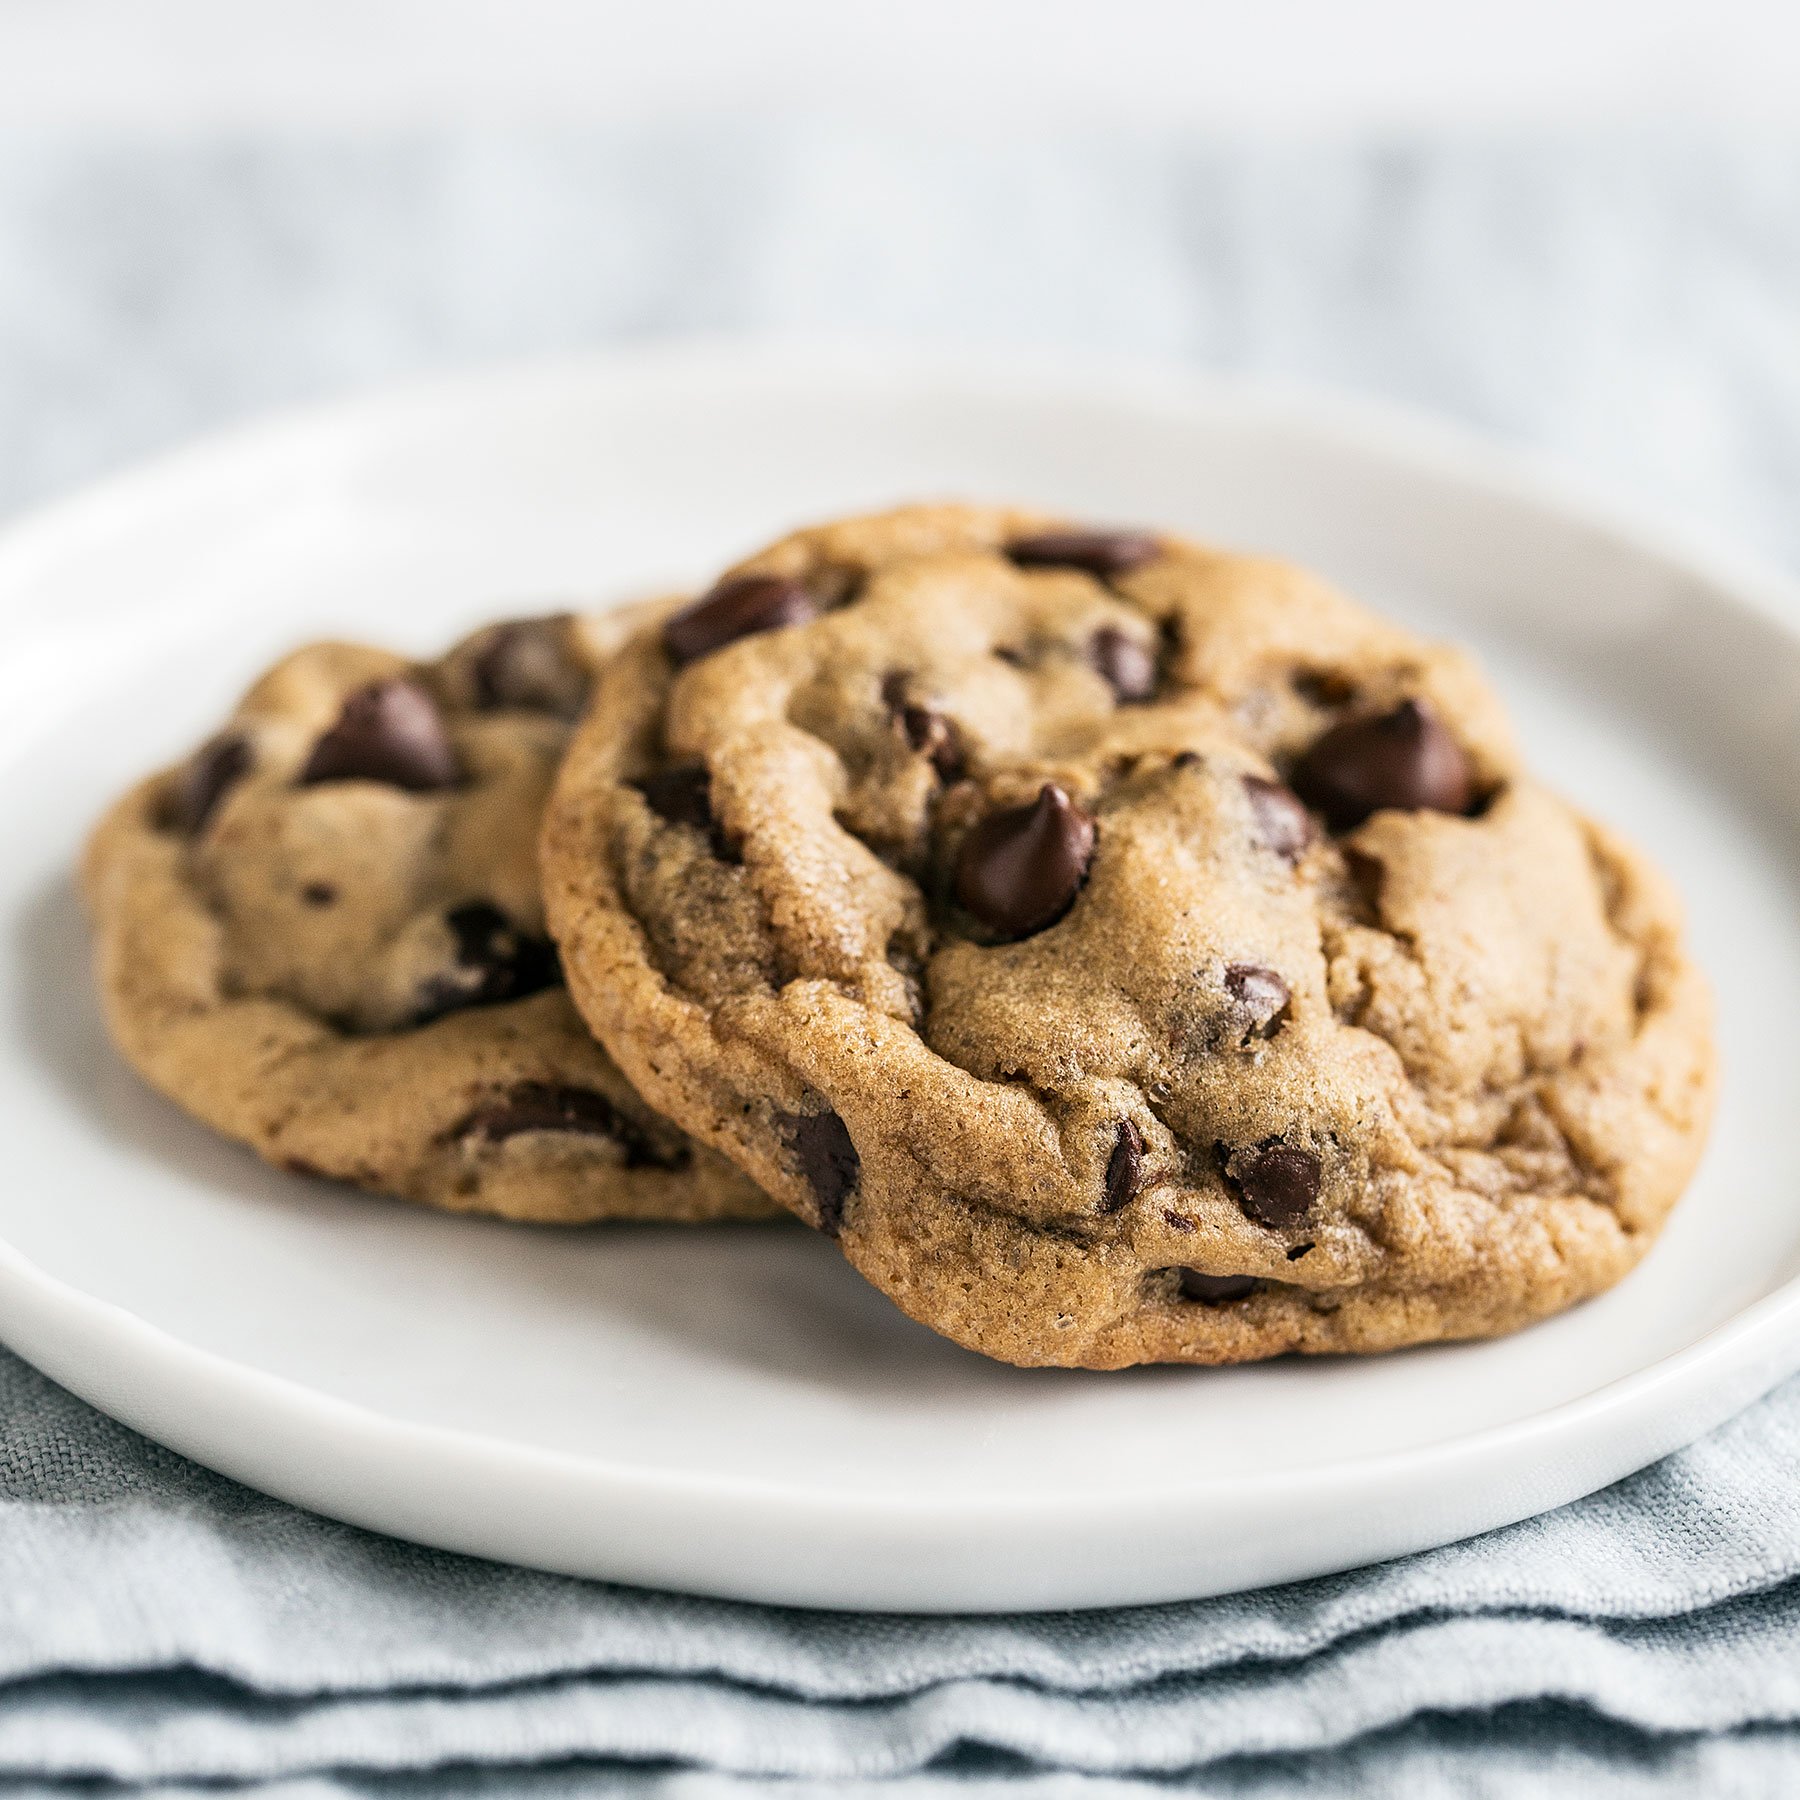 Homemade Chocolate Chip Cookie Recipe From Joanna Gaines